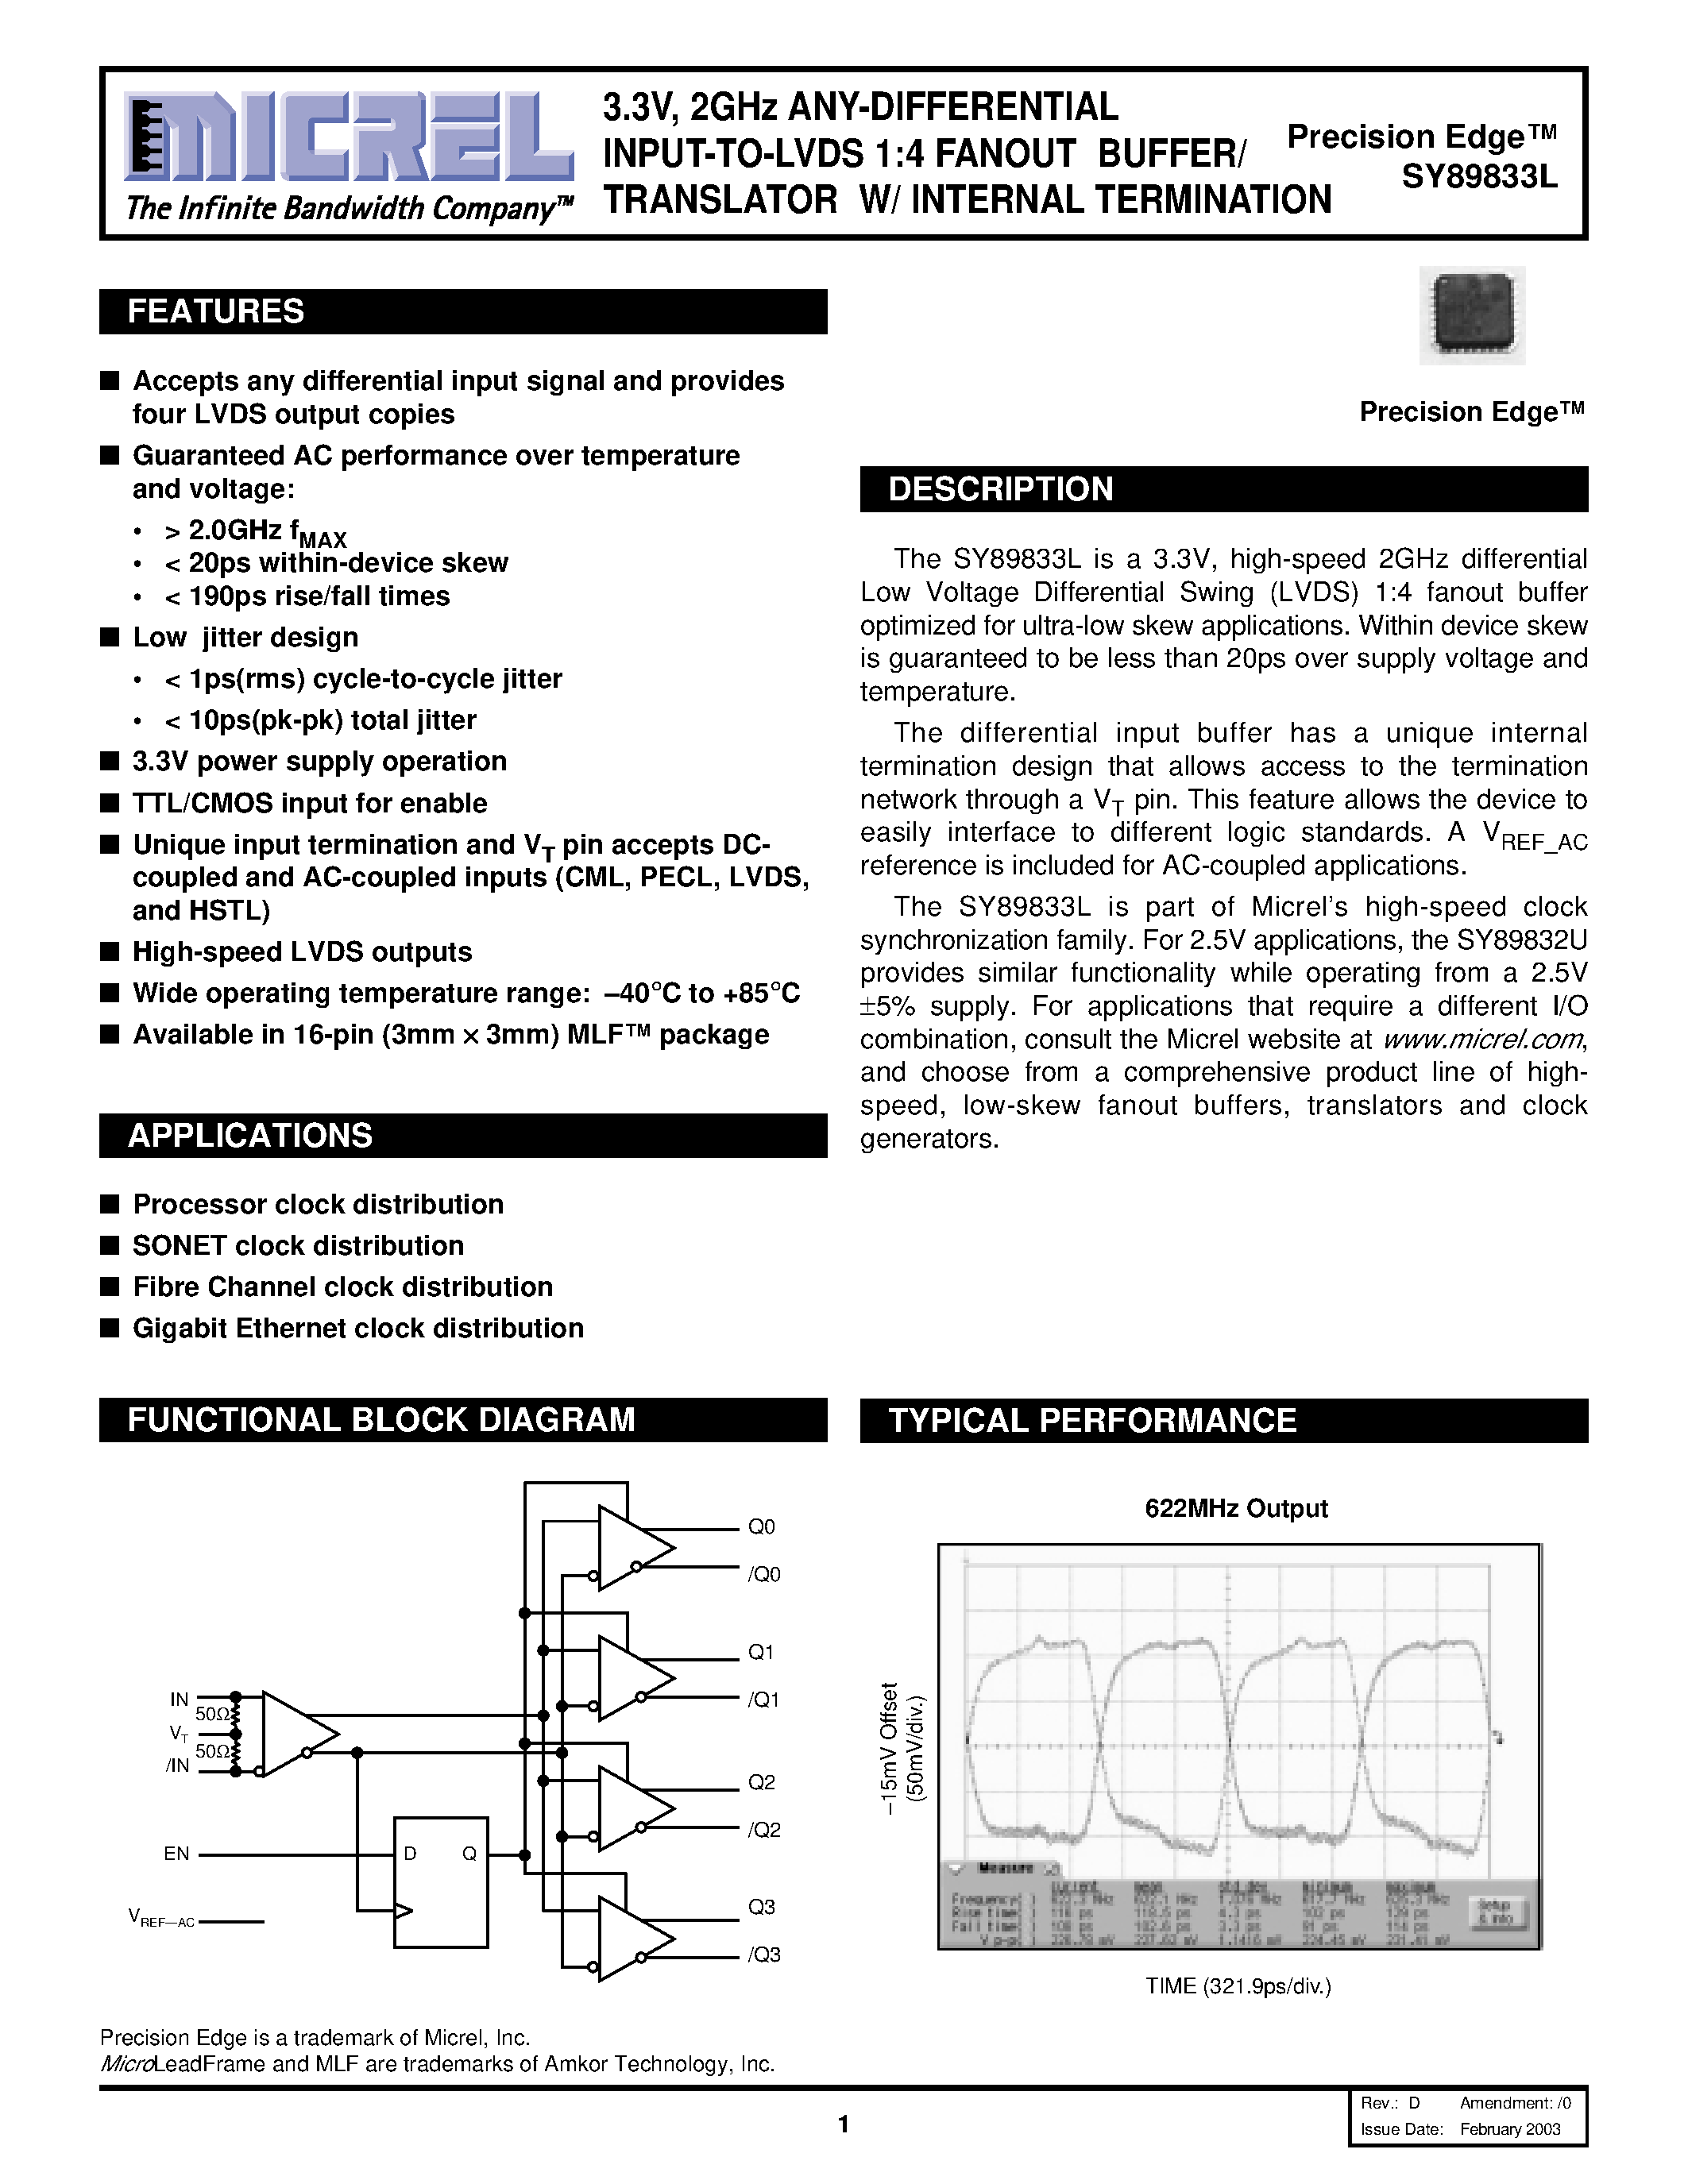 Datasheet SY89833L - 3.3V / 2GHz ANY-DIFFERENTIAL INPUT-TO-LVDS 1:4 FANOUT BUFFER/TRANSLATOR W/ INTERNAL TERMINATION page 1